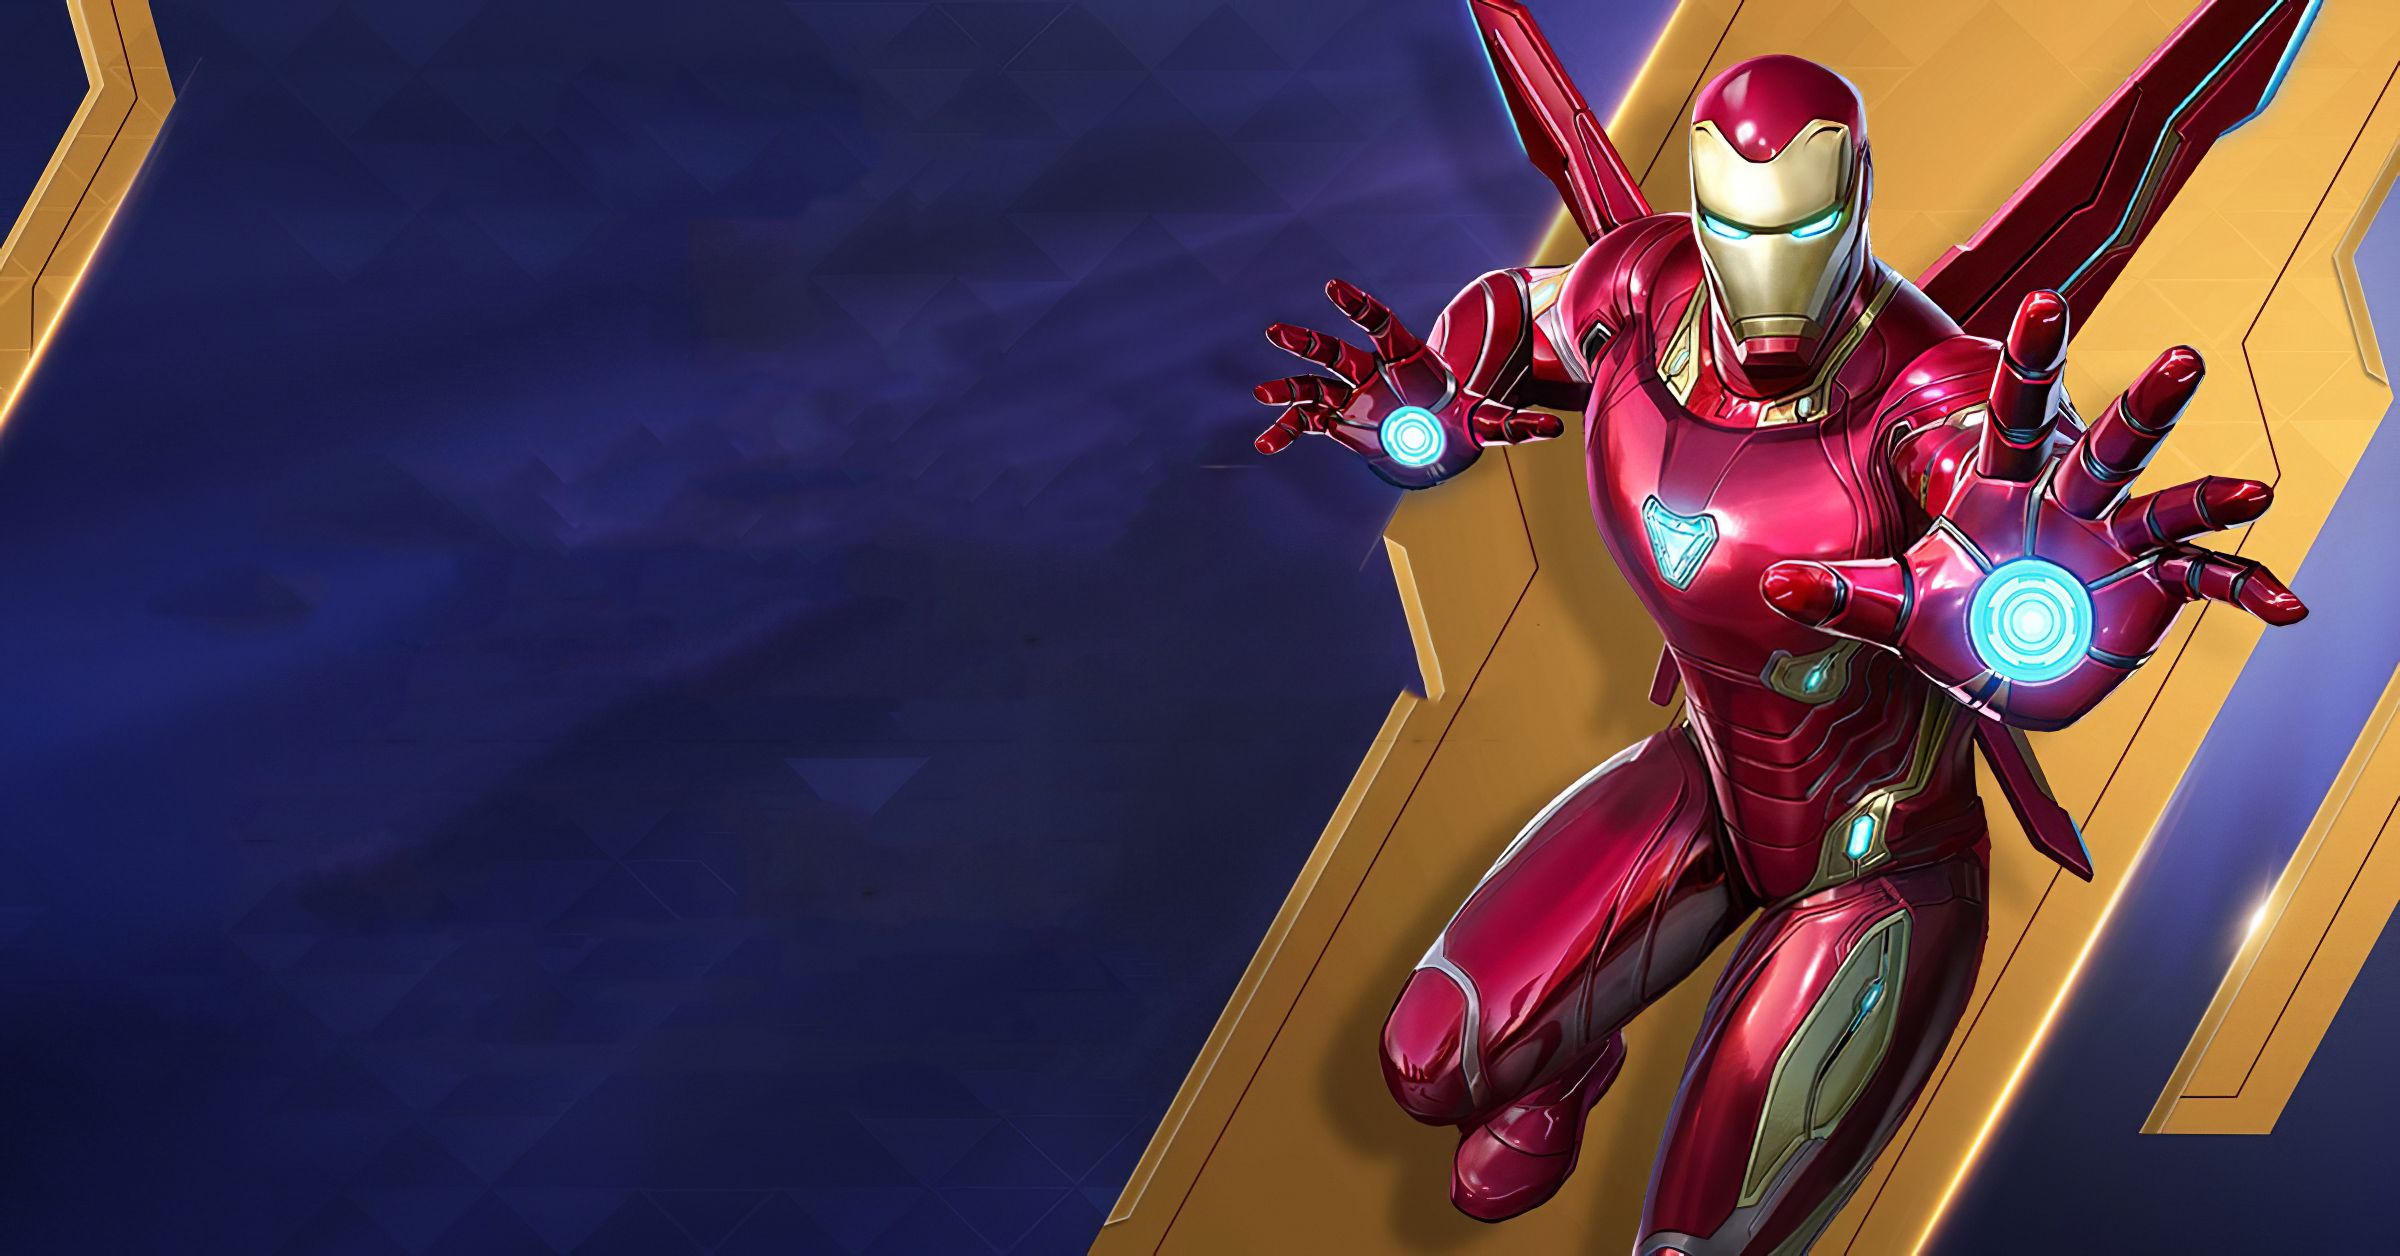 Iron Man Marvel Super War, HD Games, 4k Wallpaper, Image, Background, Photo and Picture